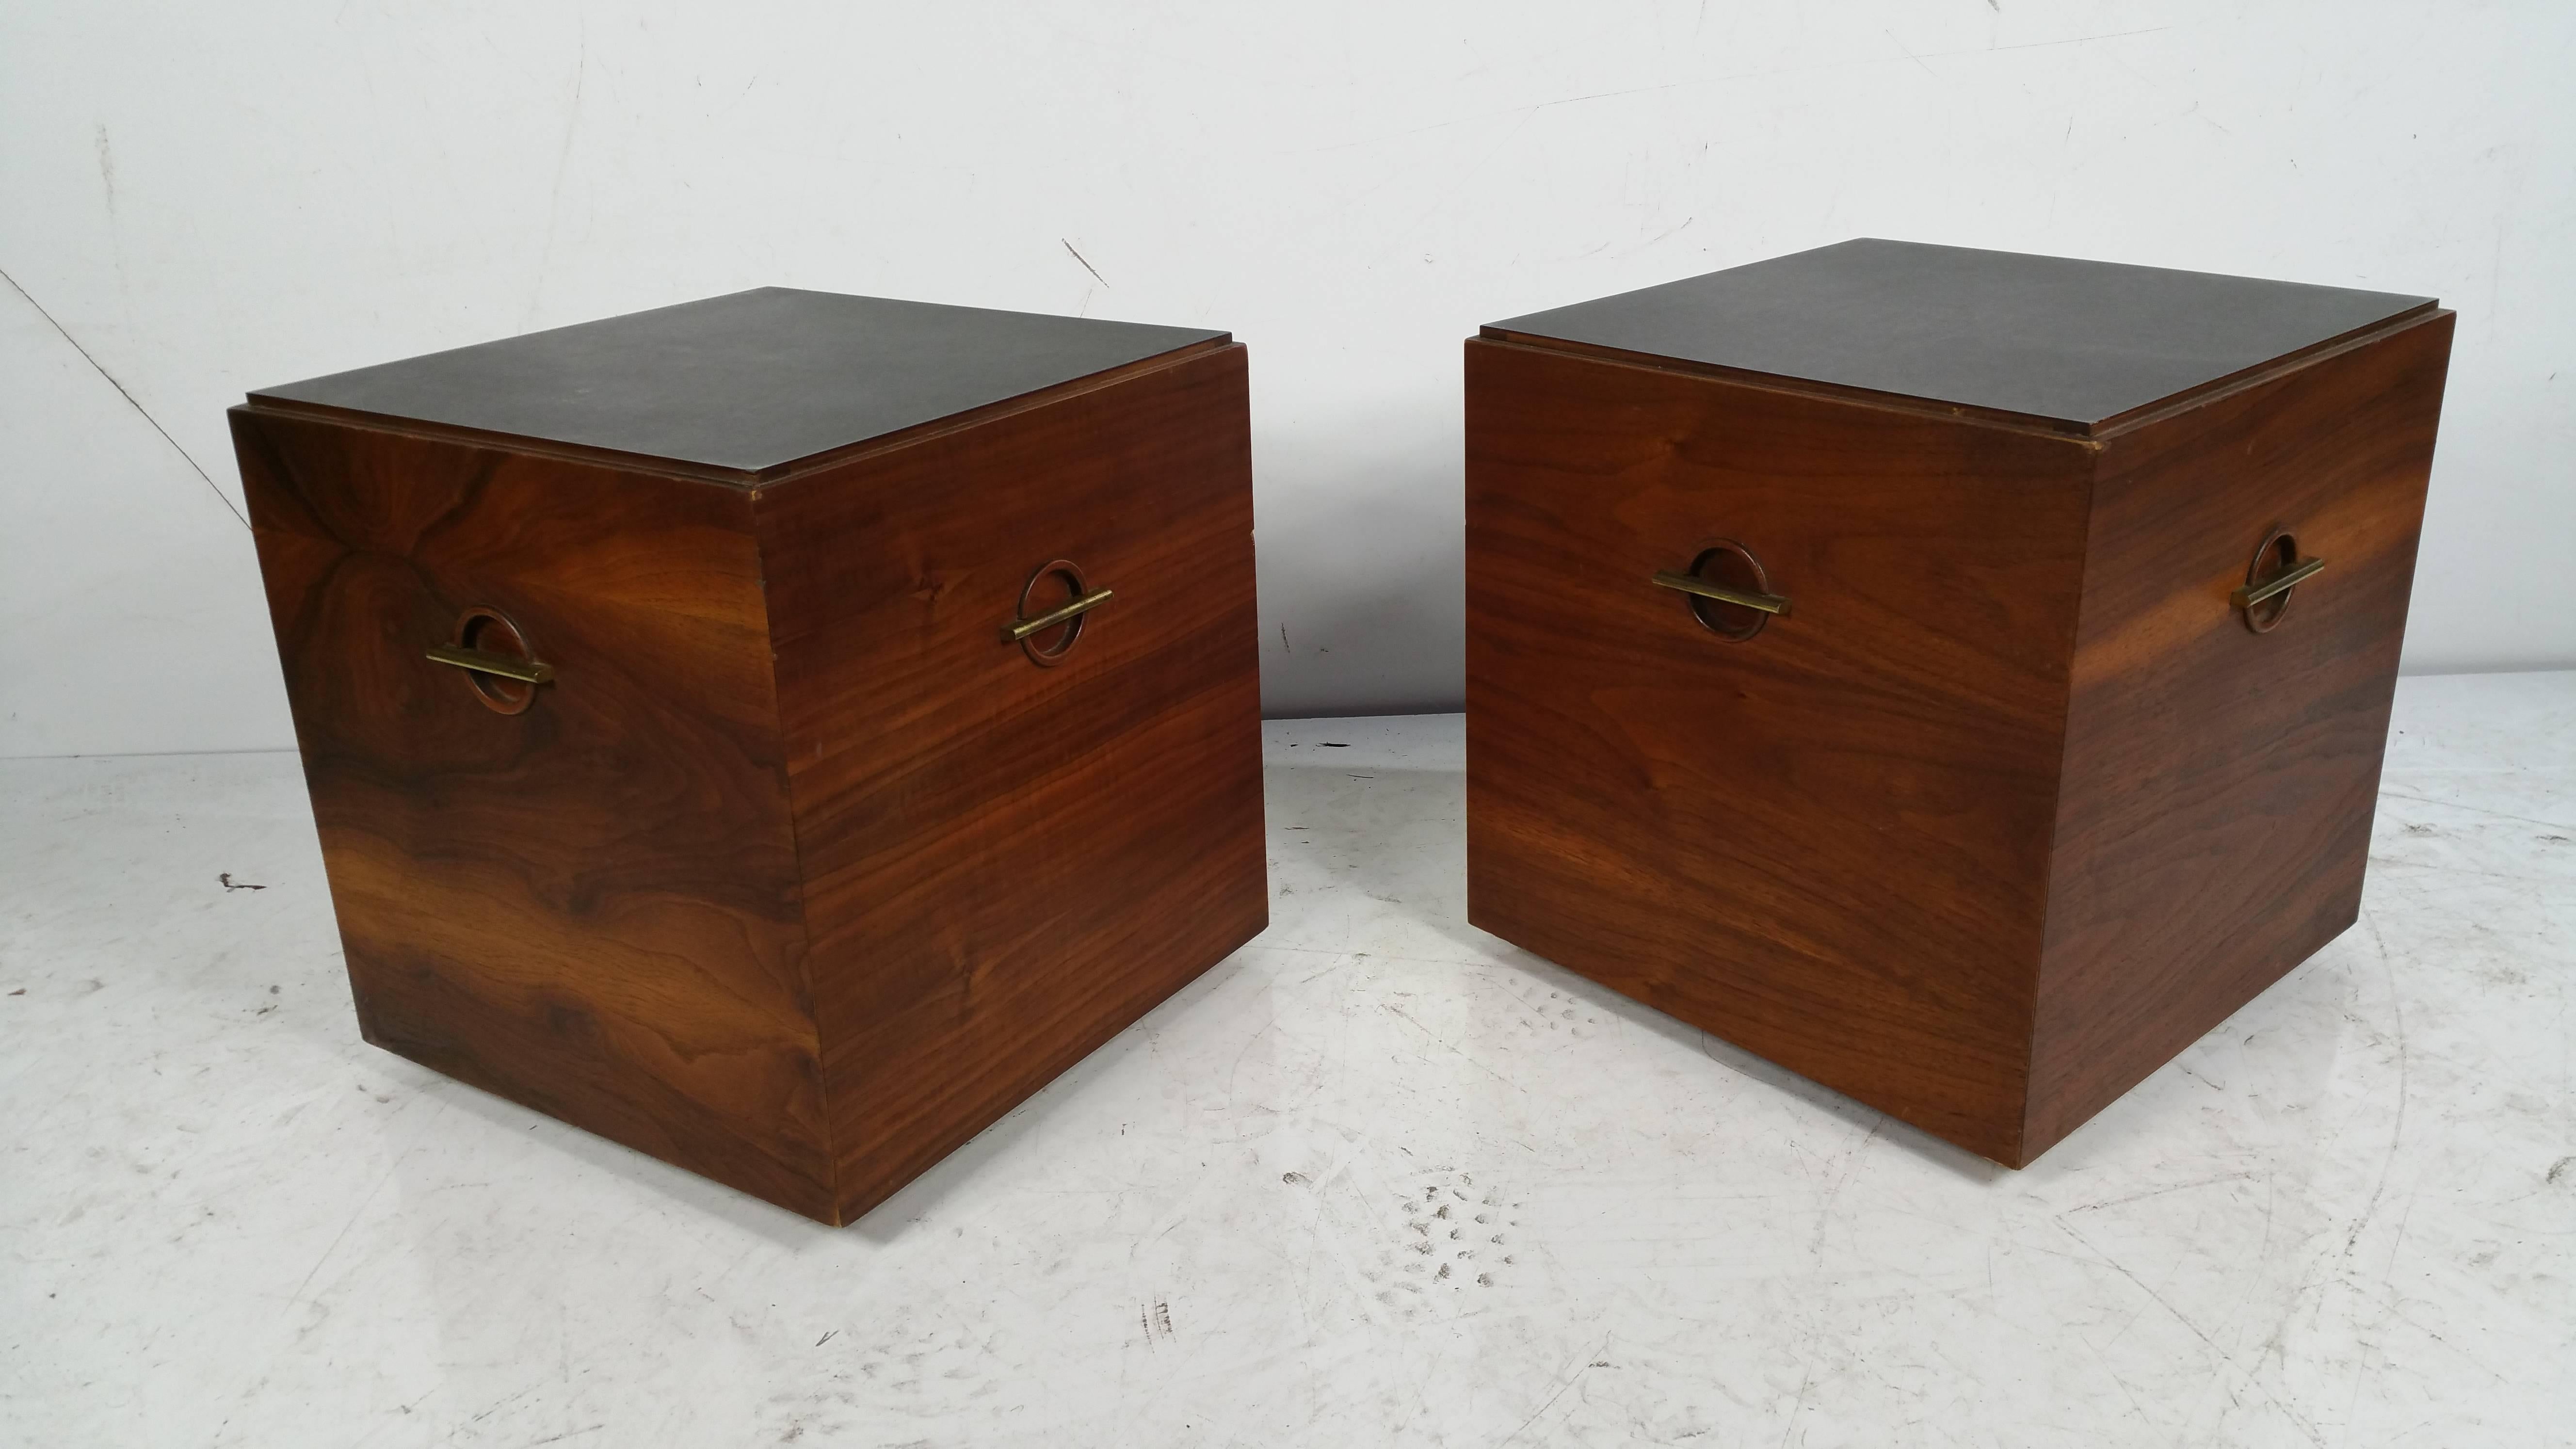 Unusual pair of stands manufactured by Lane,, Figured walnut wood,,handsome brass detailing to all four sides,, Faux slate tops,,on castors.